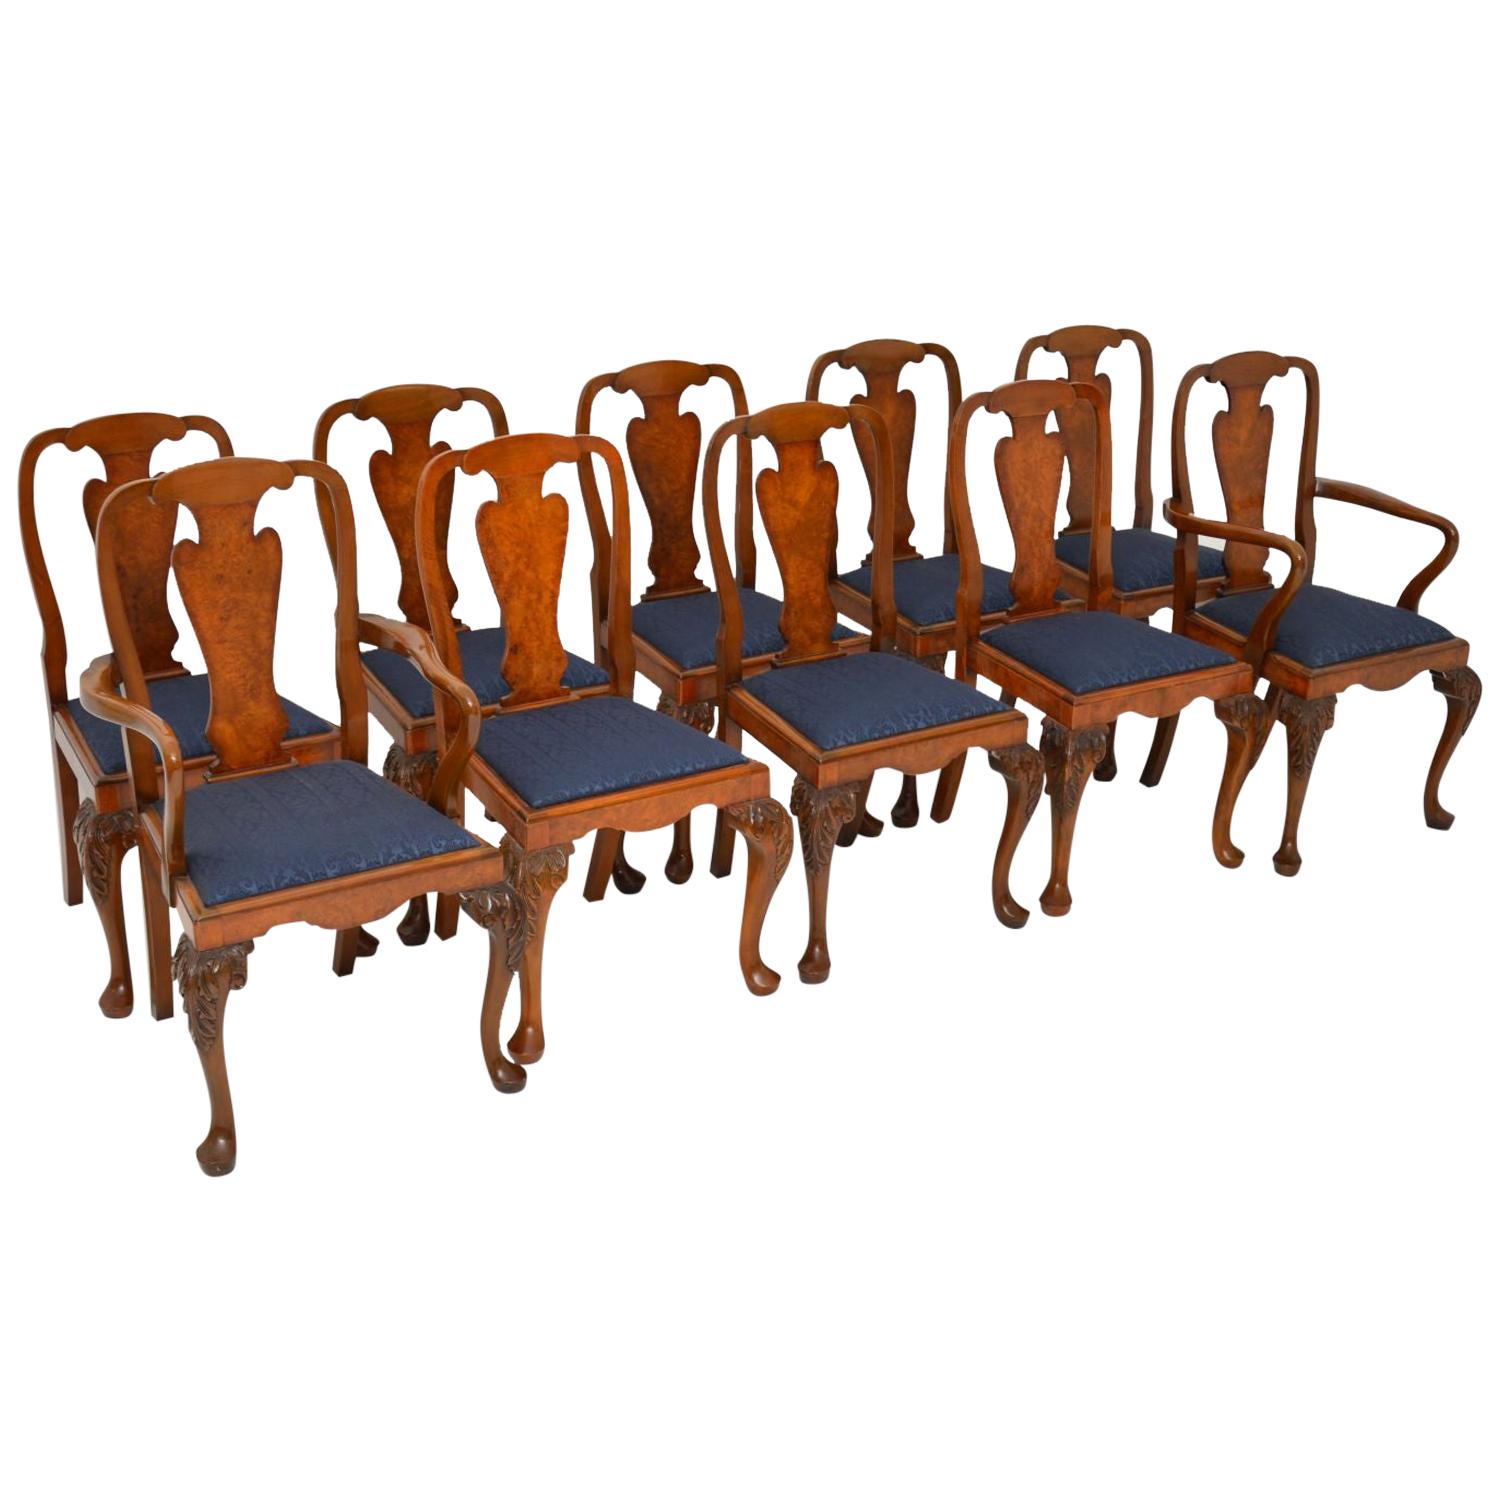 Set of 10 Antique Queen Anne Style Burr Walnut Dining Chairs